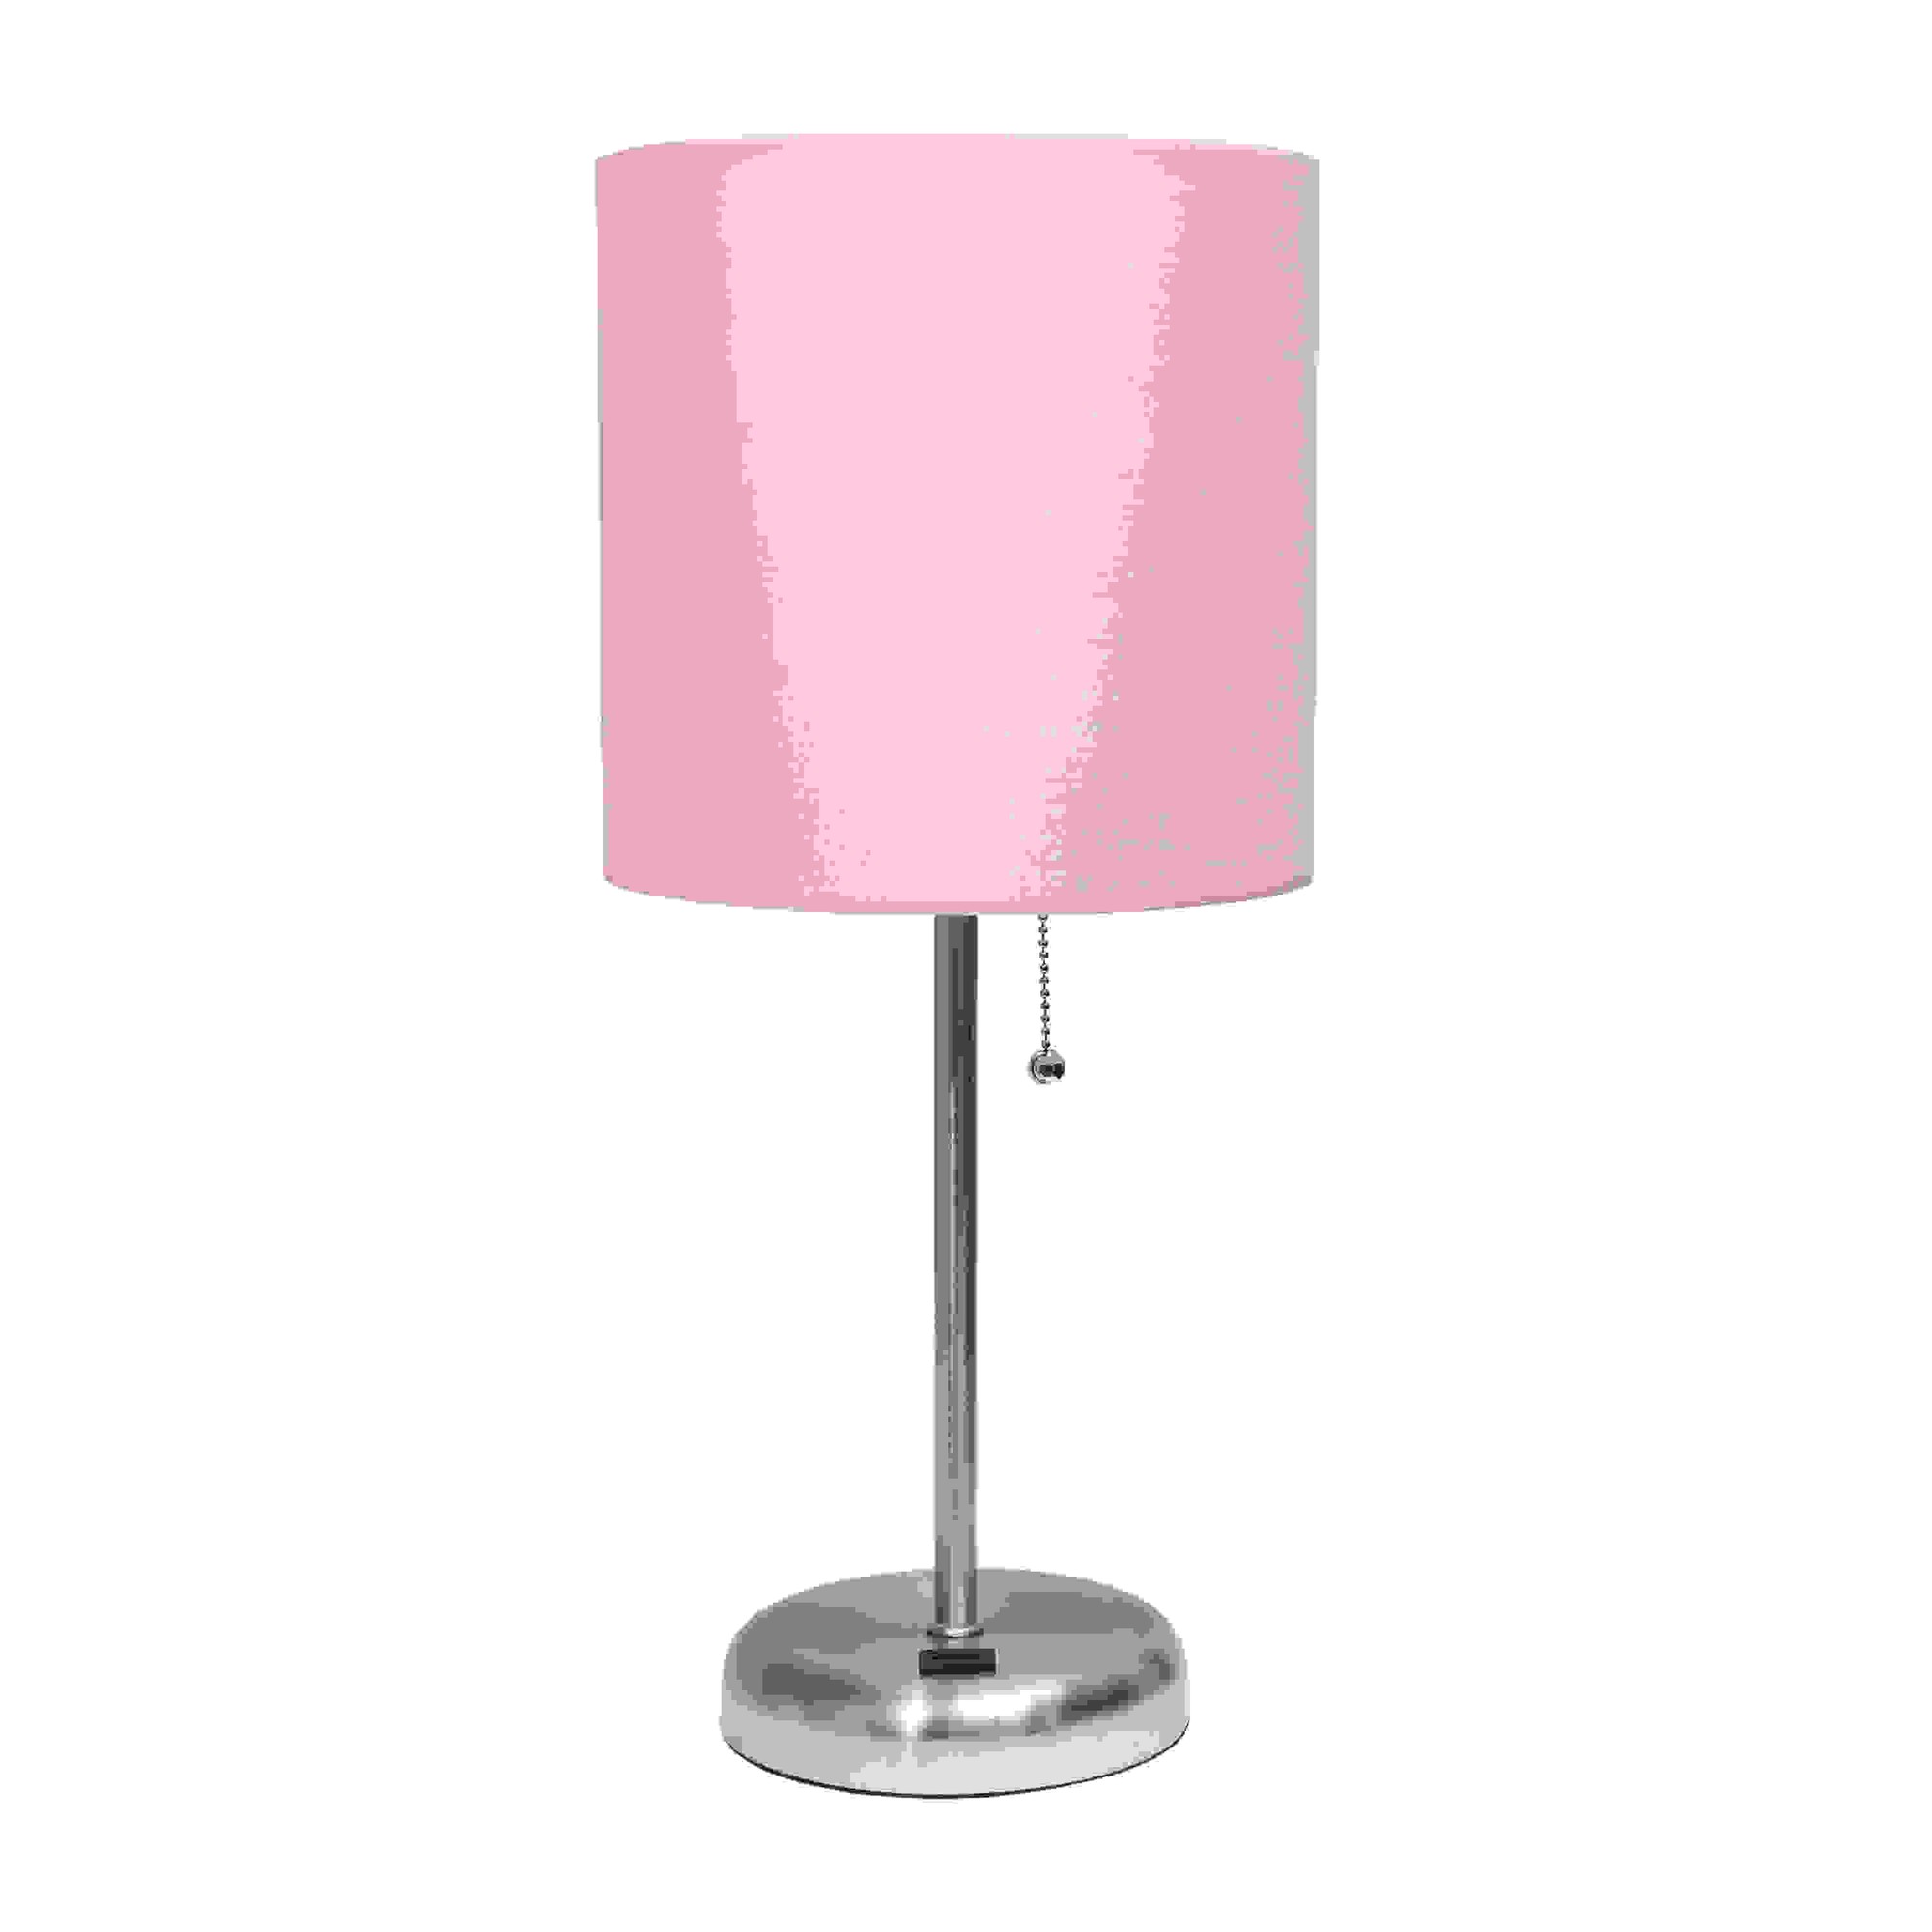 Simple Designs Stick Lamp with USB charging port and Fabric Shade, Light Pink